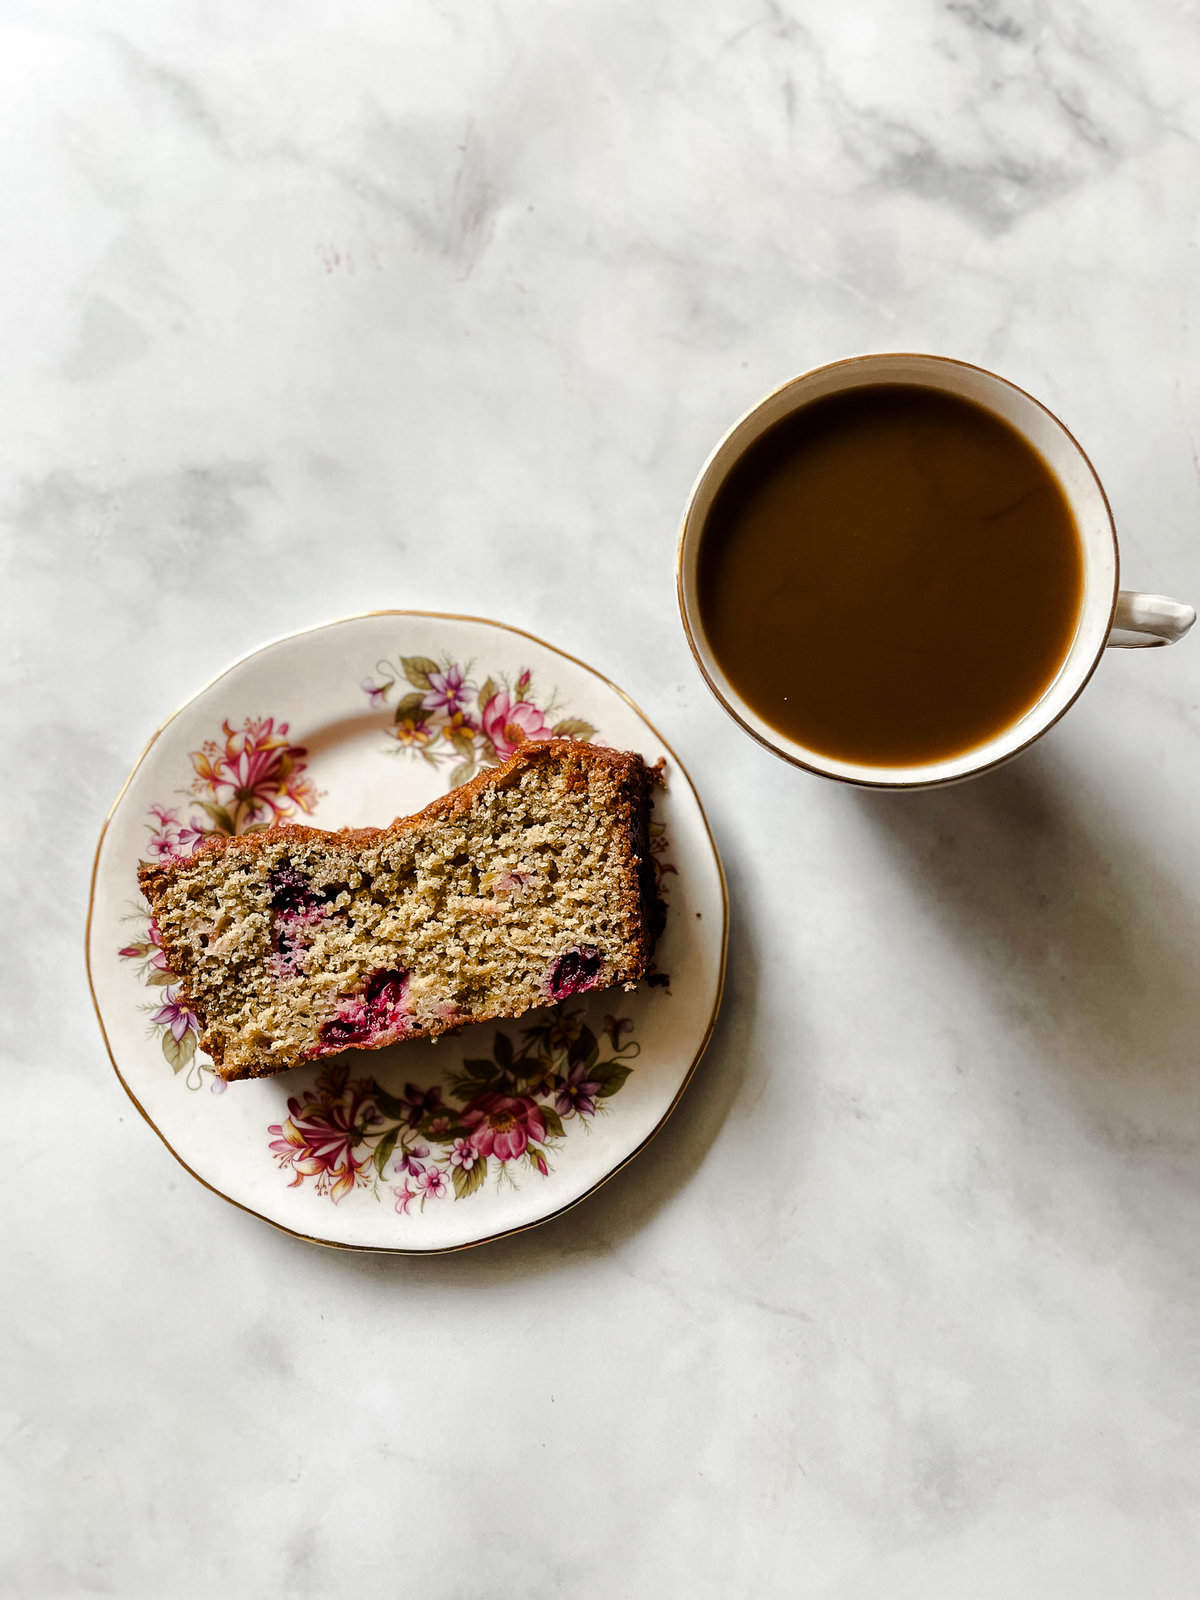 A slice of cranberry orange bread on a plate with a cup of tea.